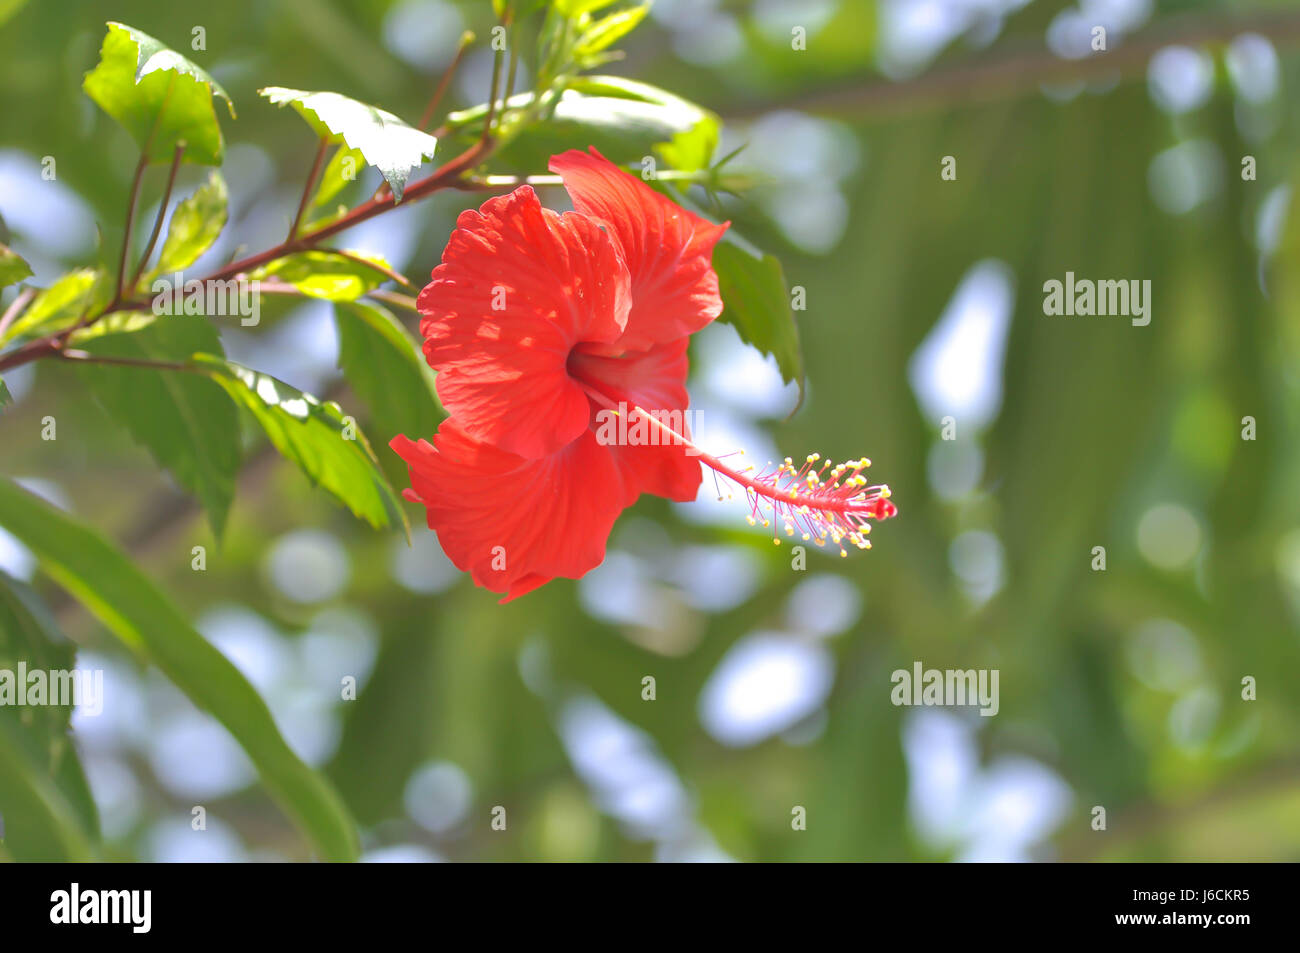 shoe flower,Chinese rose or Hibiscus Stock Photo